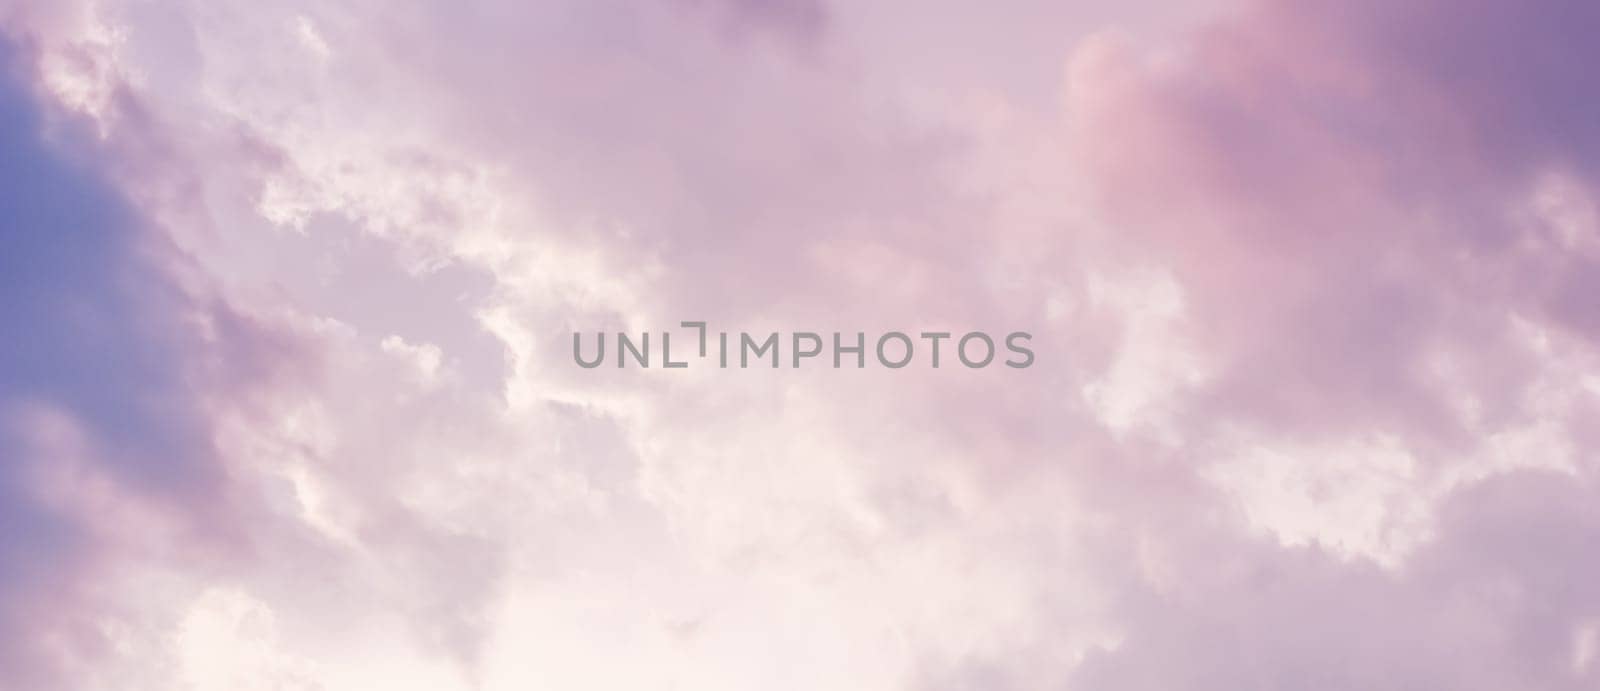 Background of a beautiful pink and pale purple sky with clouds at sunset by Olayola